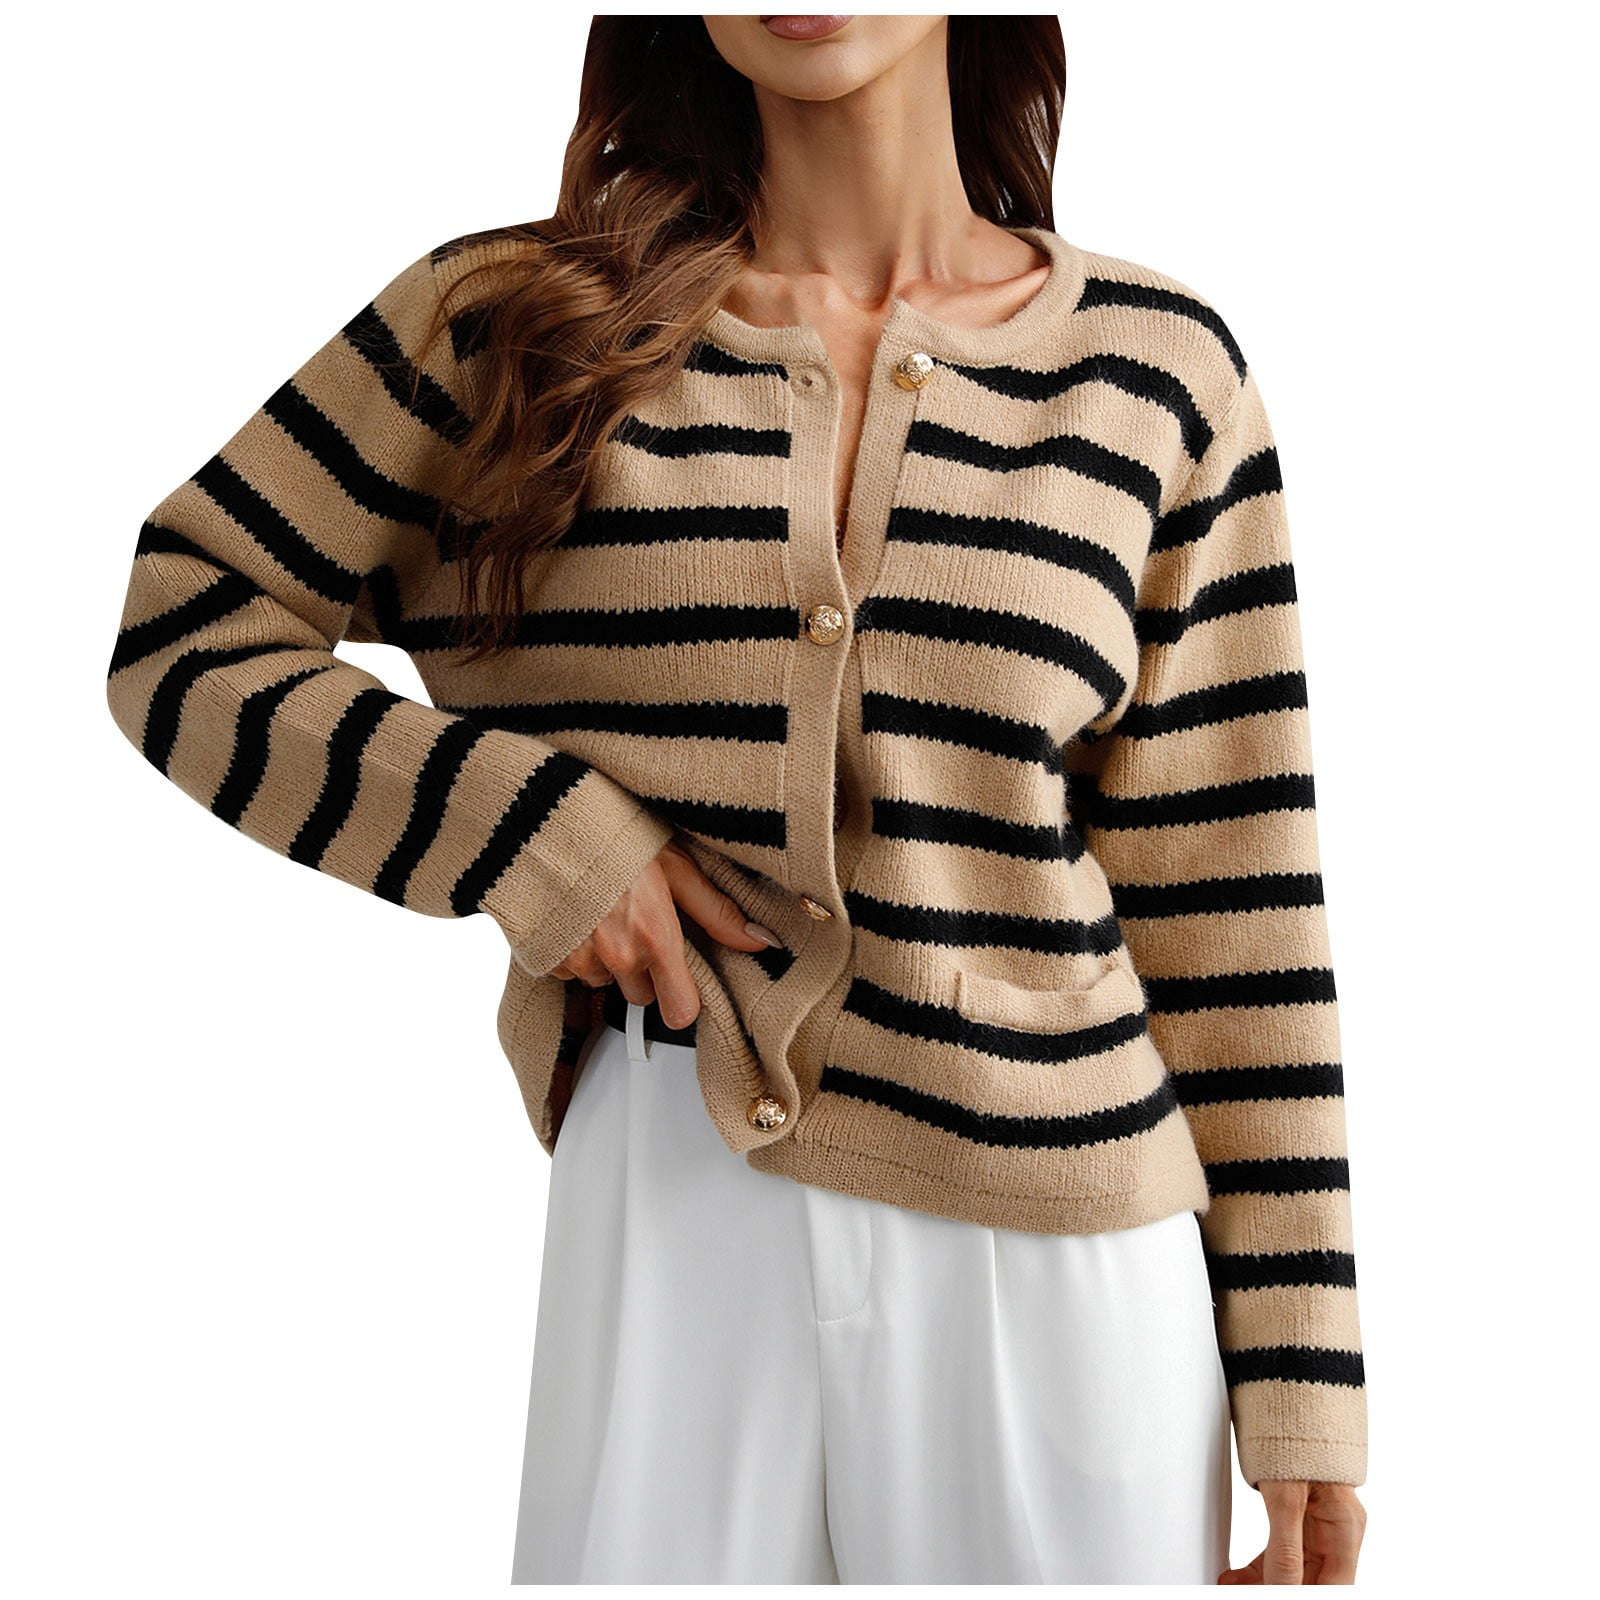 Women's Sweaters, Ropa De Invierno Para Mujer Fall Outfits Clothes